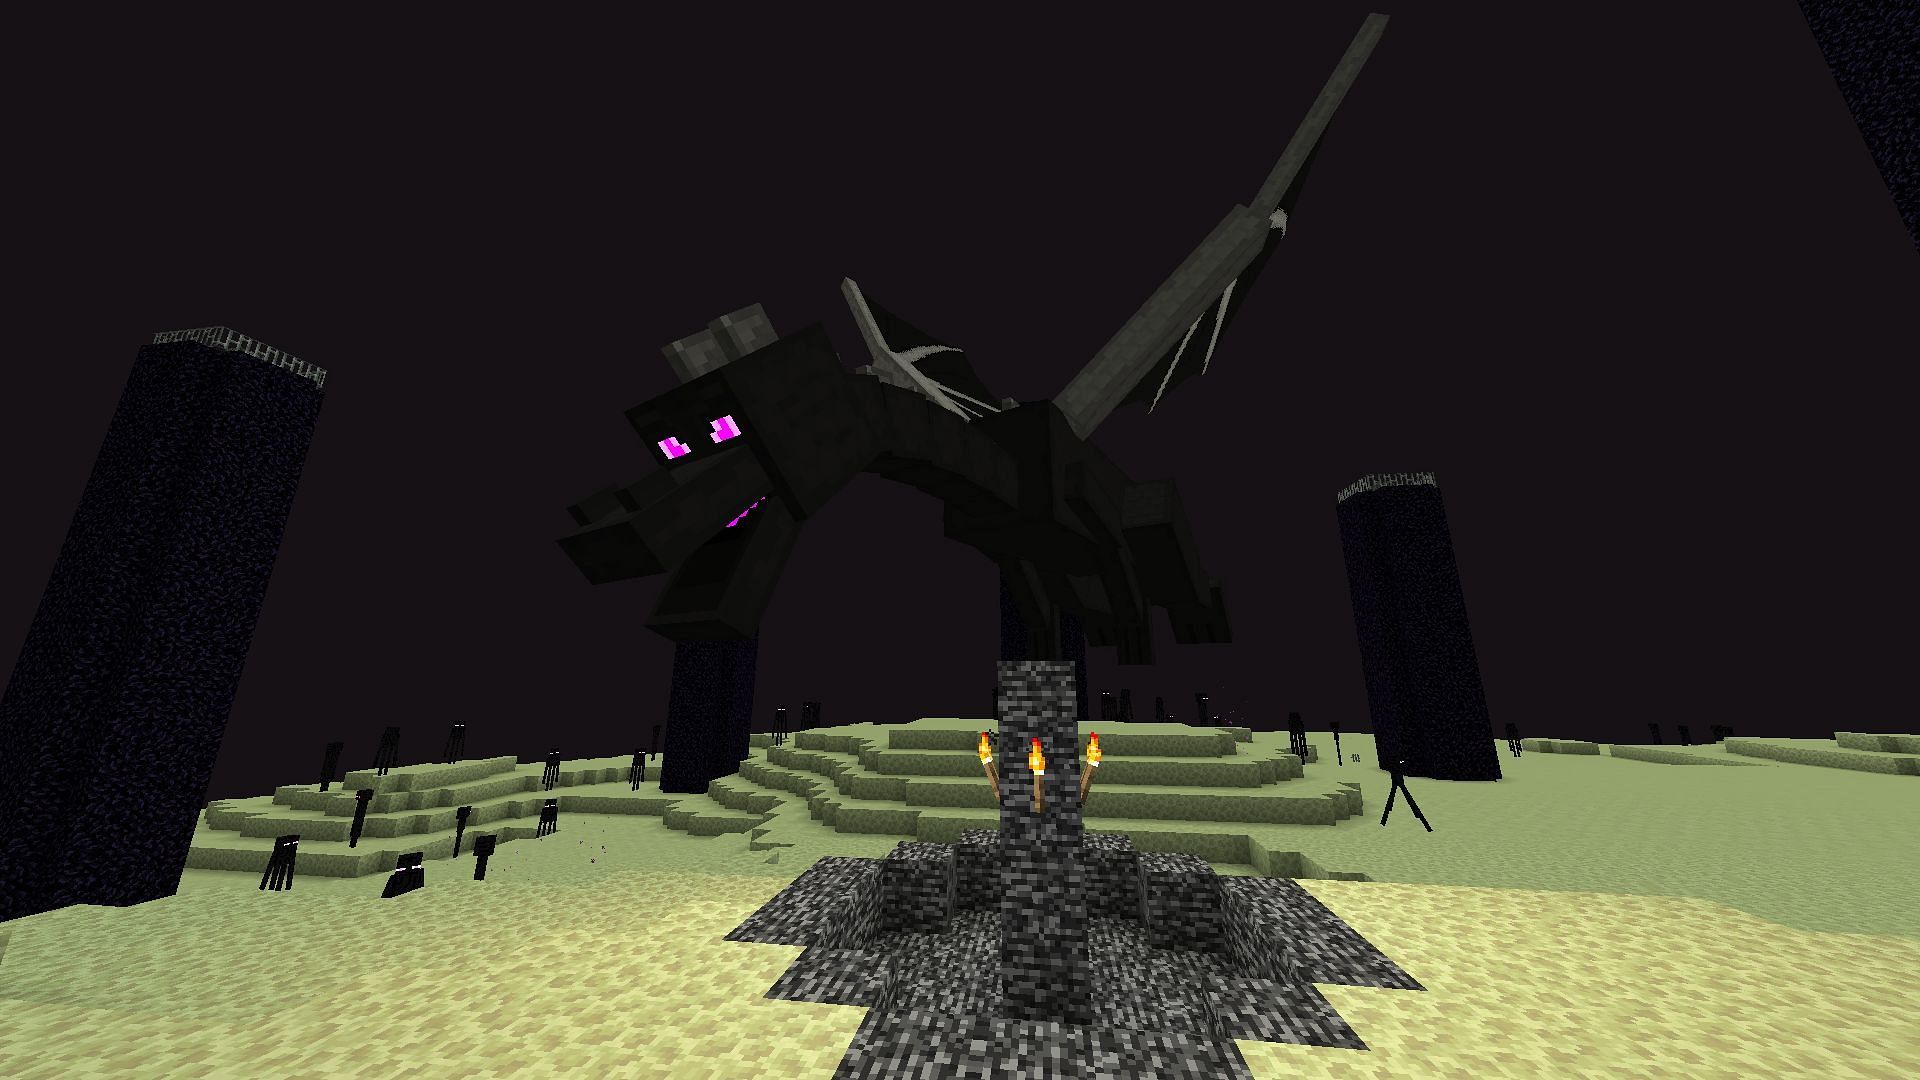 Players will be thrown into a fight with the Ender Dragon right after entering the End in Minecraft (Image via Mojang)